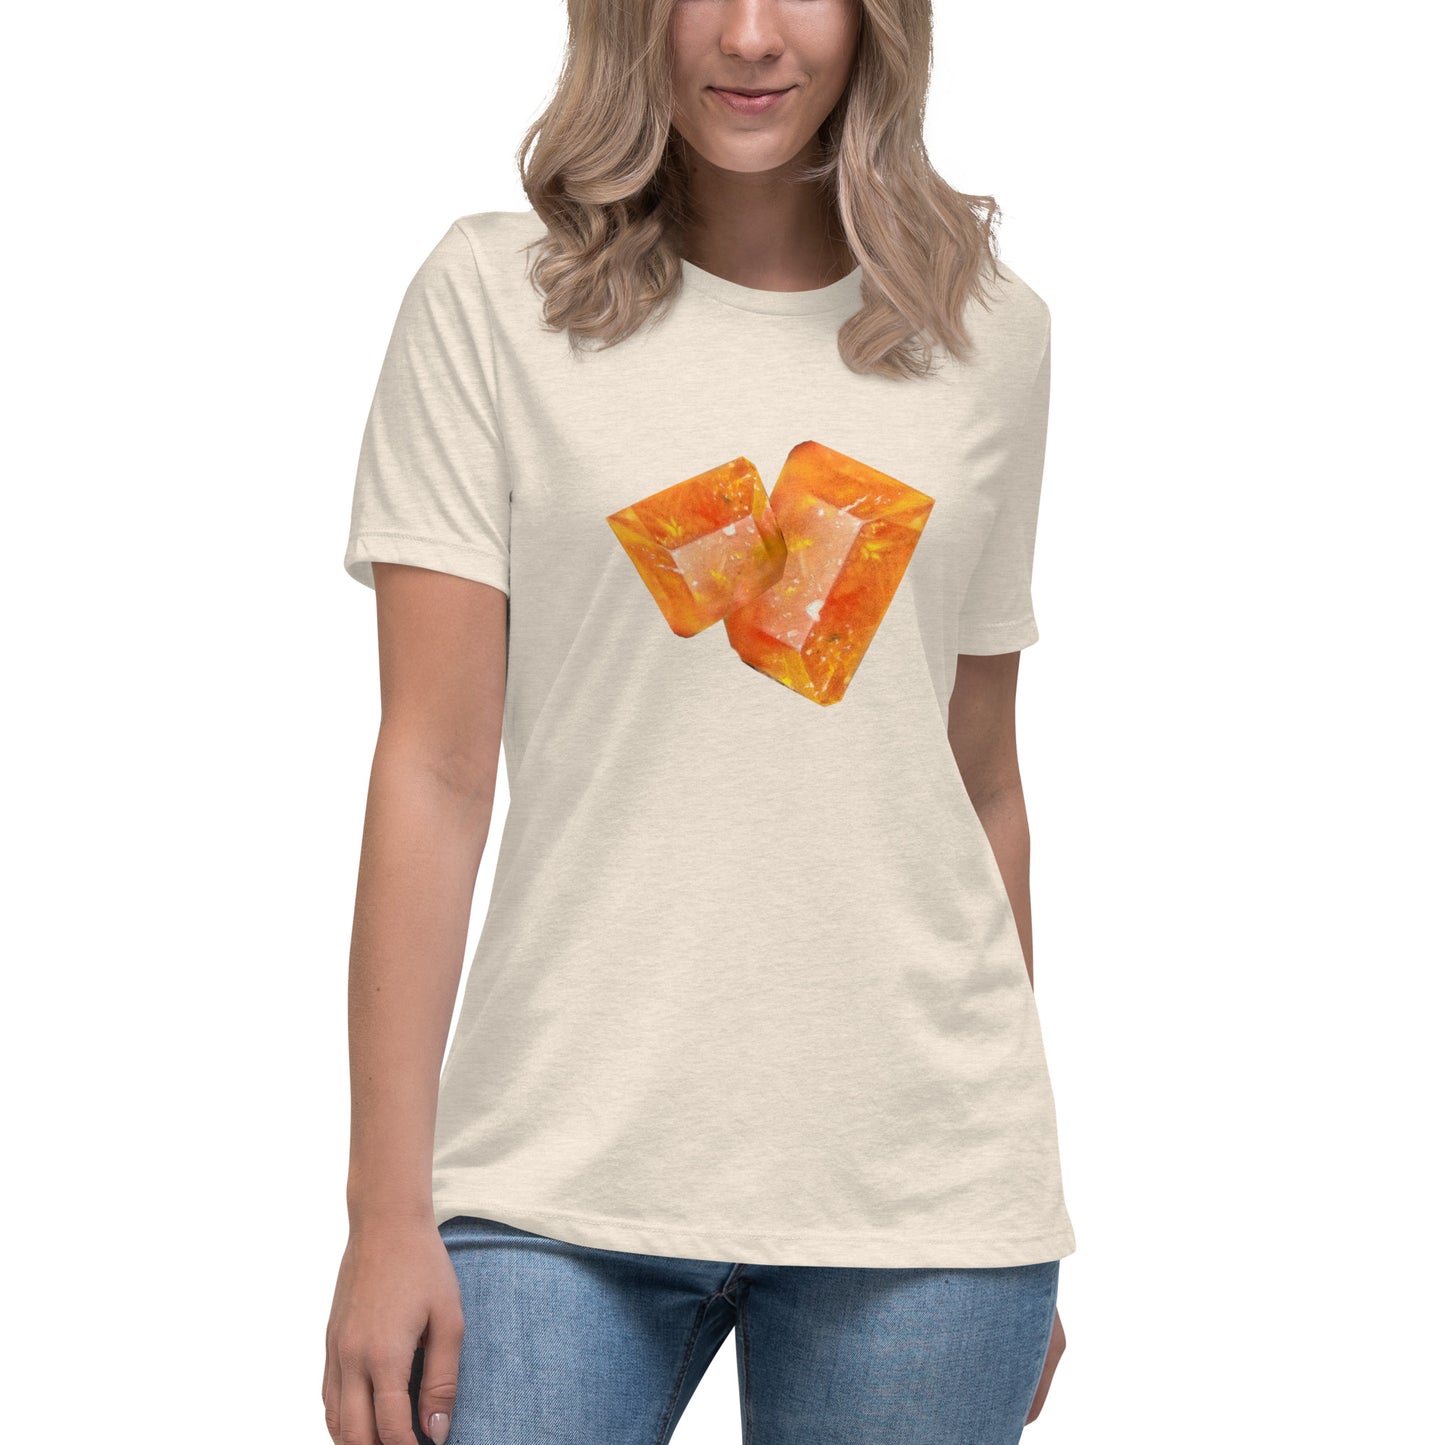 Wulfenite Blades - Women's Relaxed T-Shirt